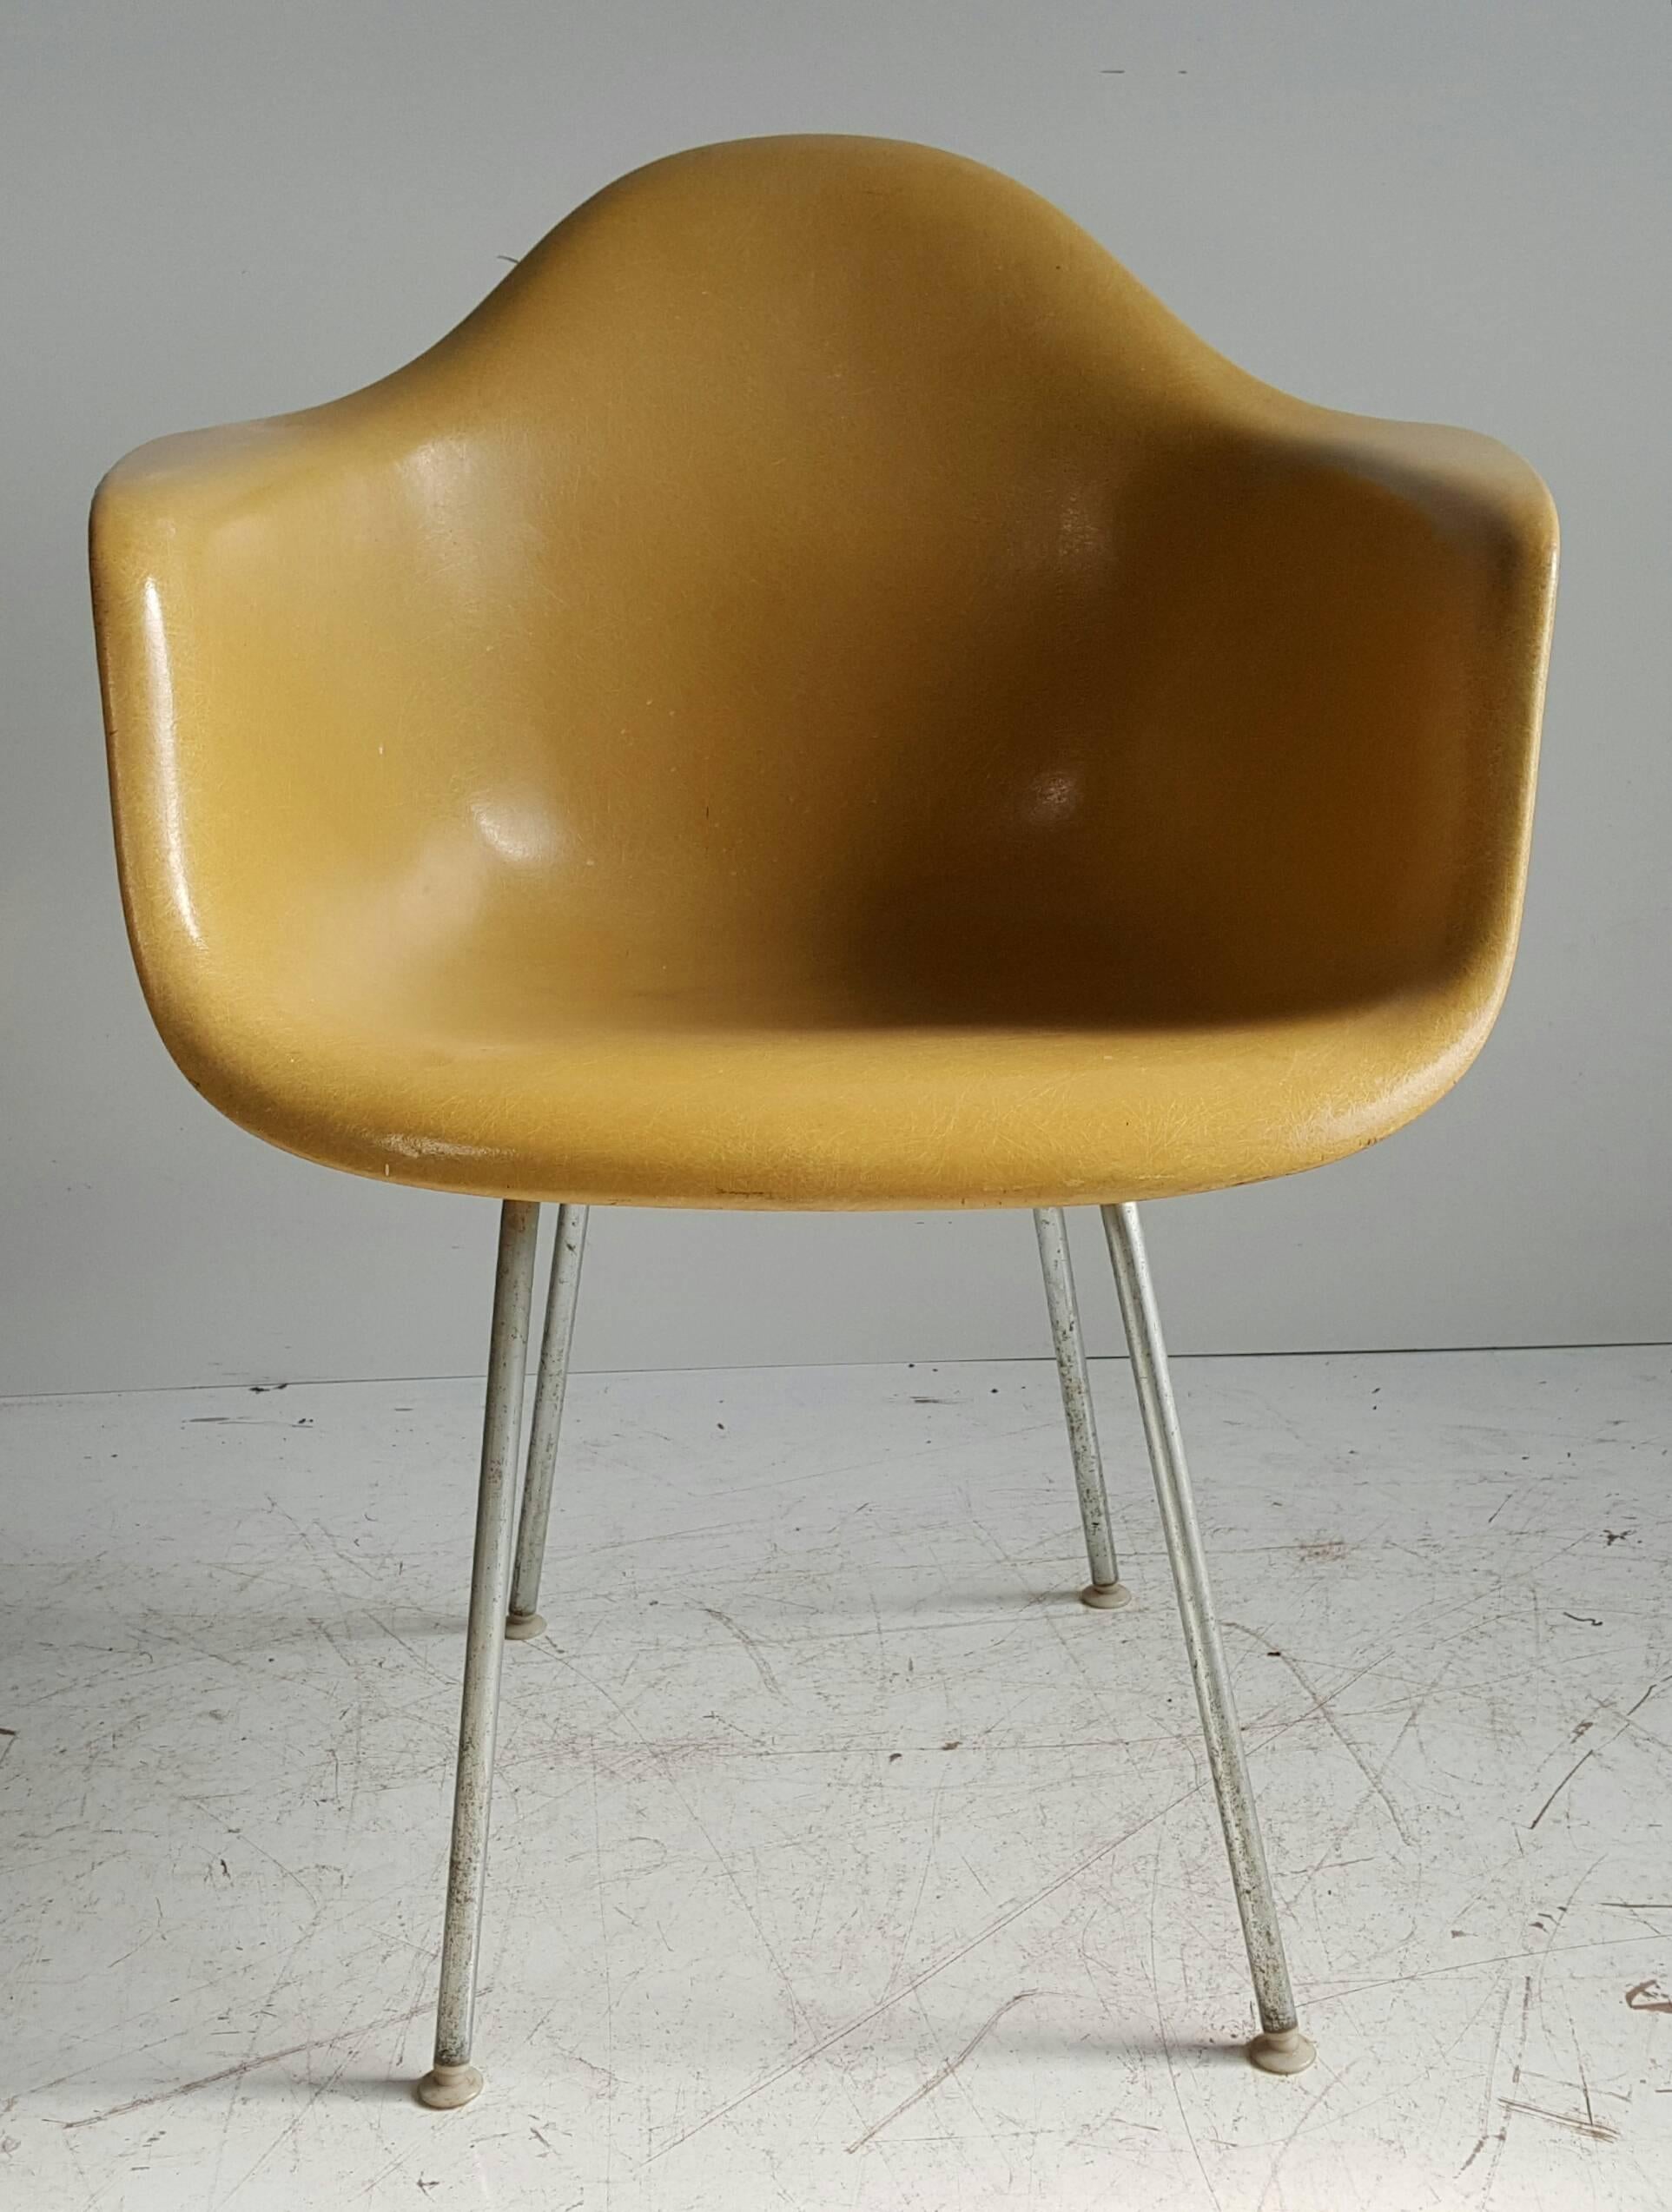 North American Charles and Ray Eames Arm Shell Chair, Classic Mid-Century Modern